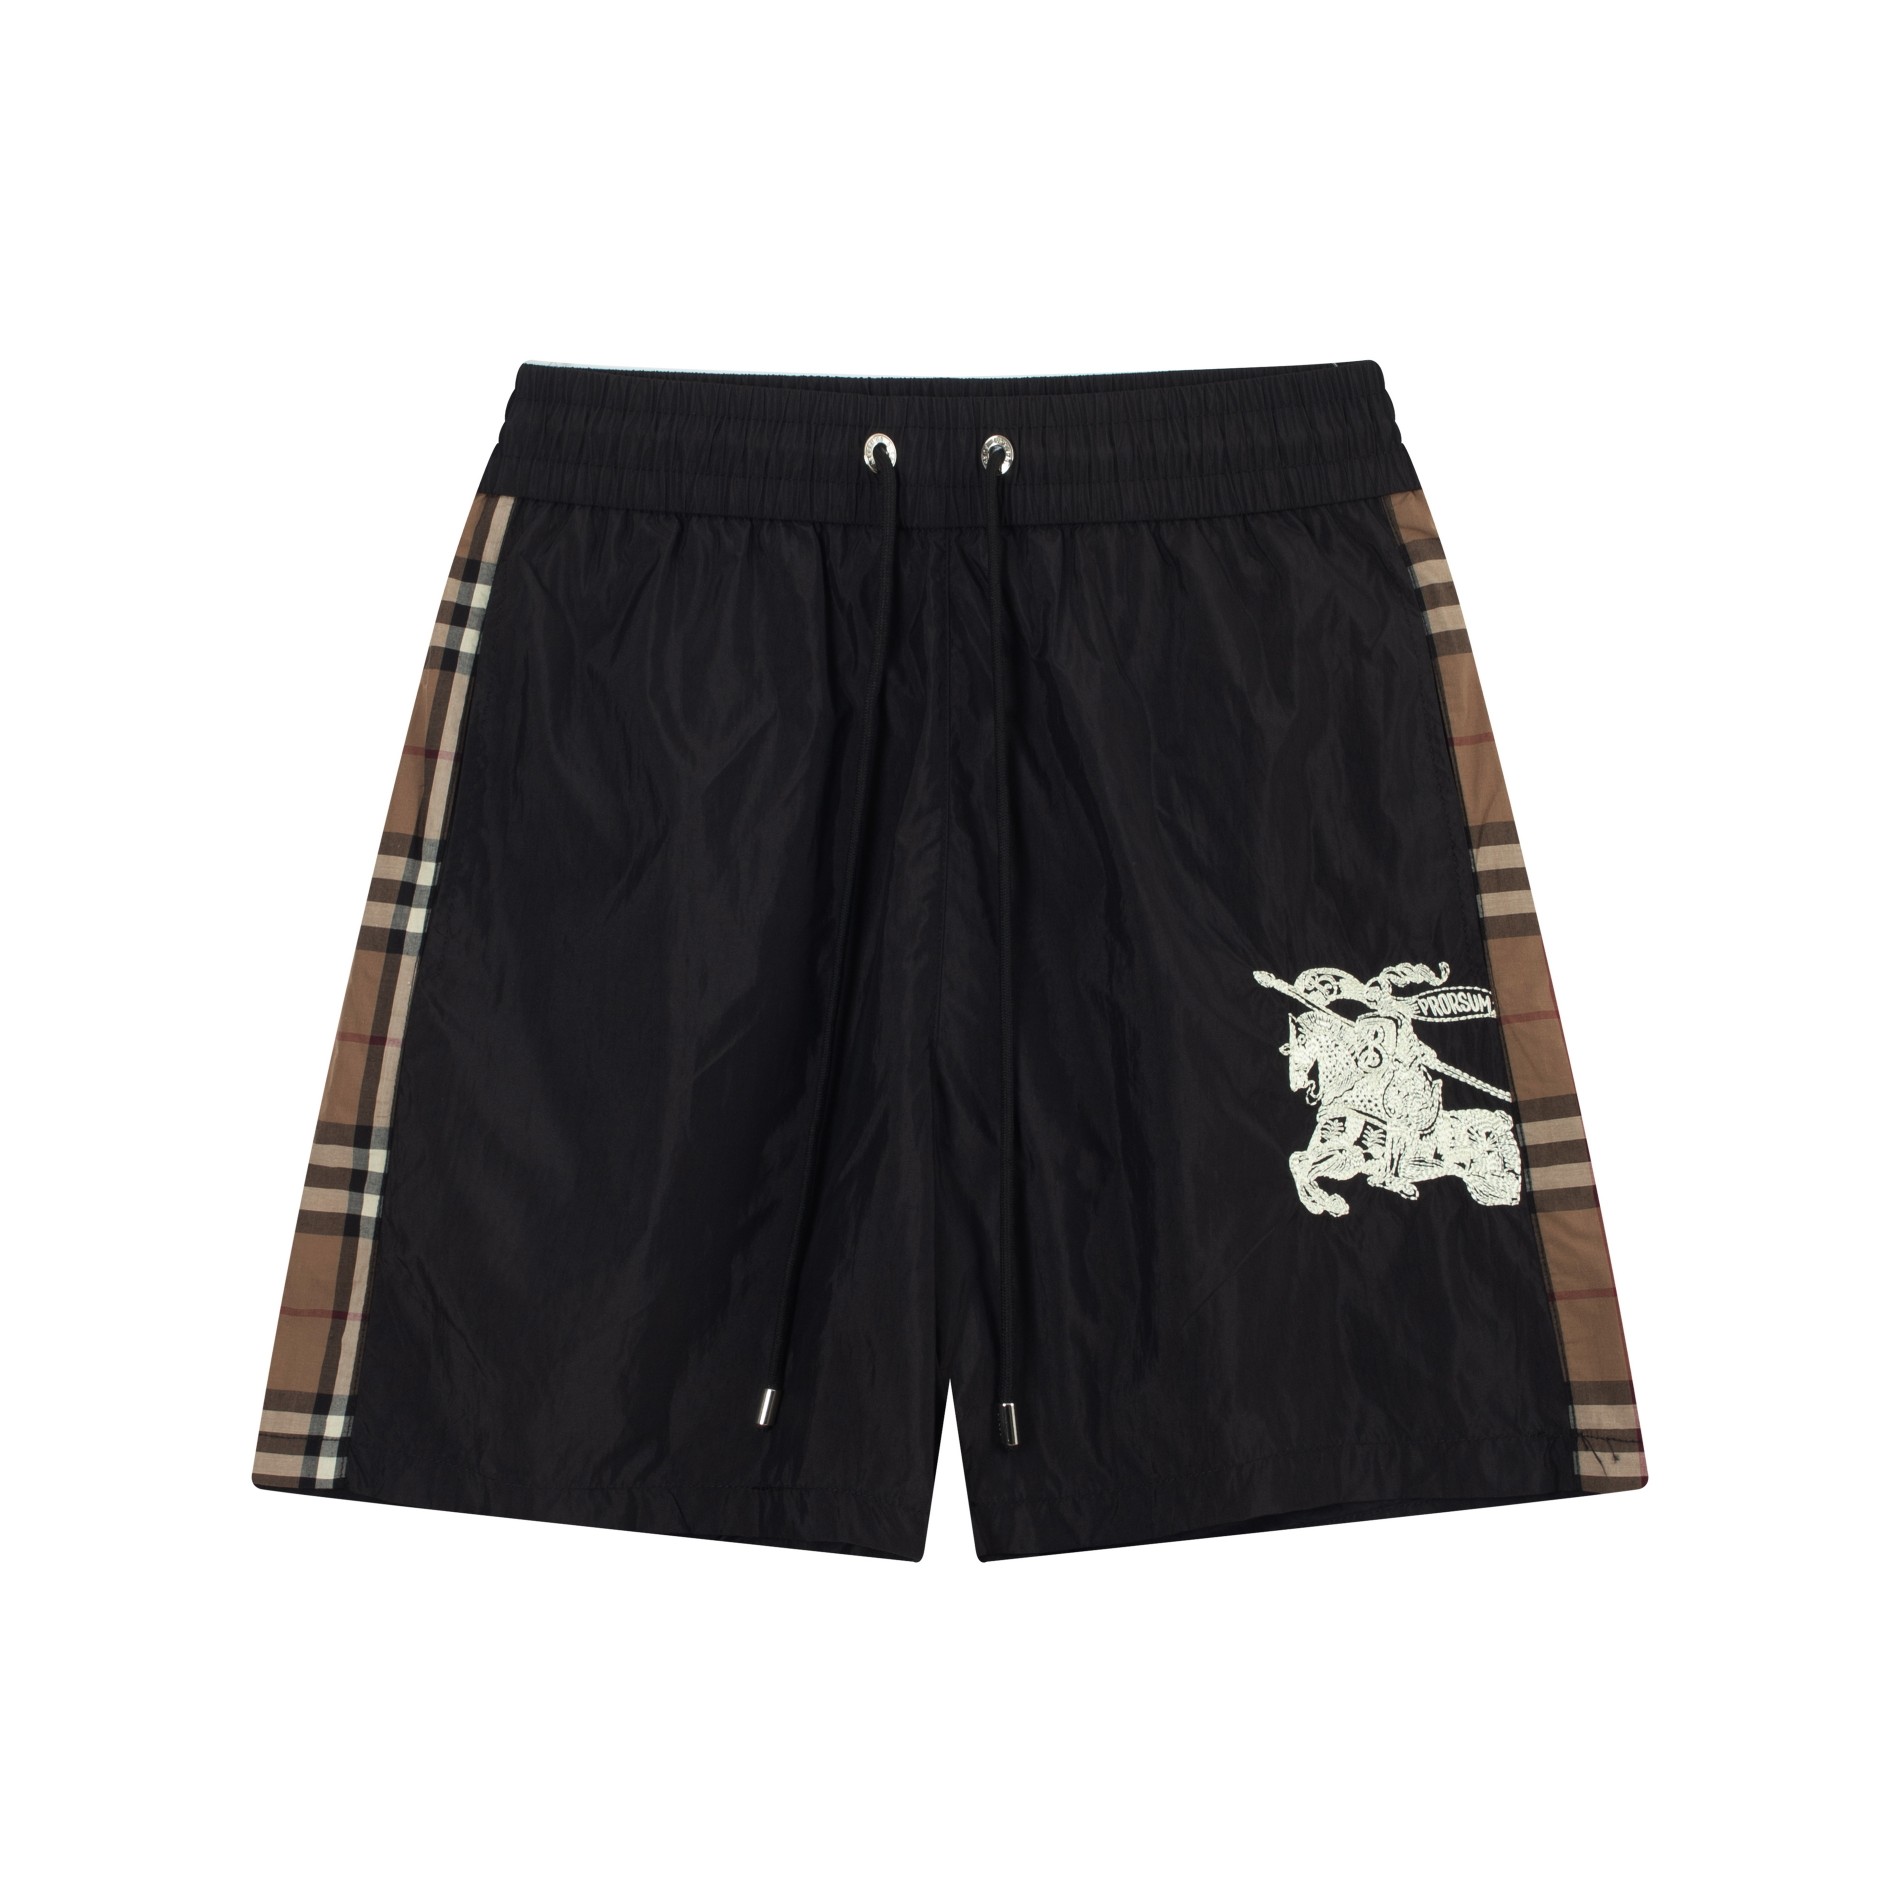 Burberry Clothing Shorts Black Polyester Summer Collection Fashion Beach